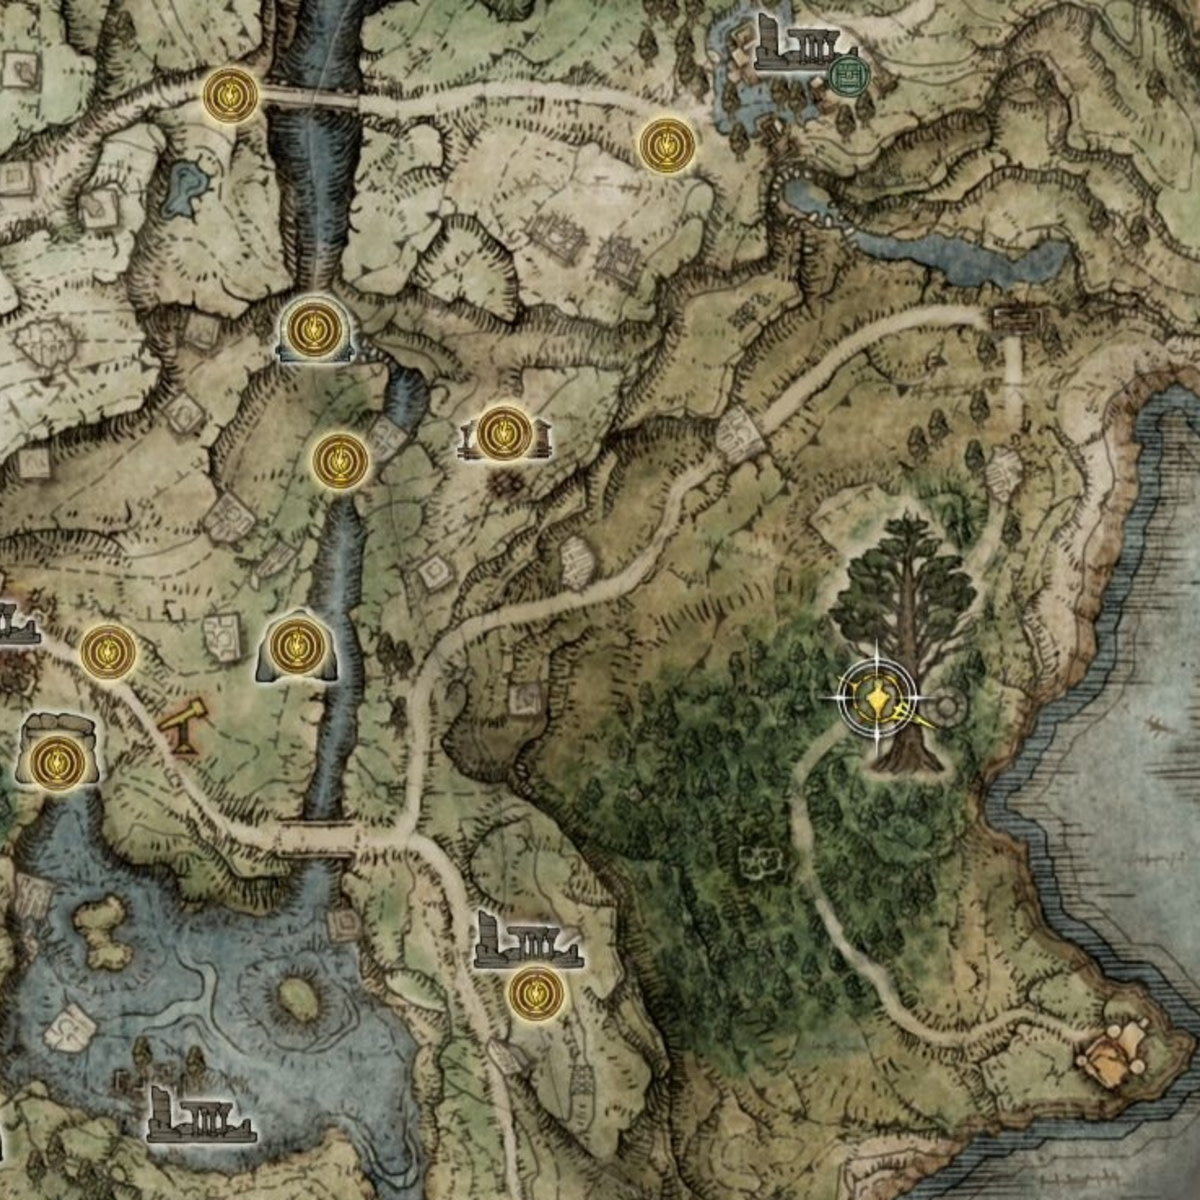 Finding Places on the Elden Ring Map